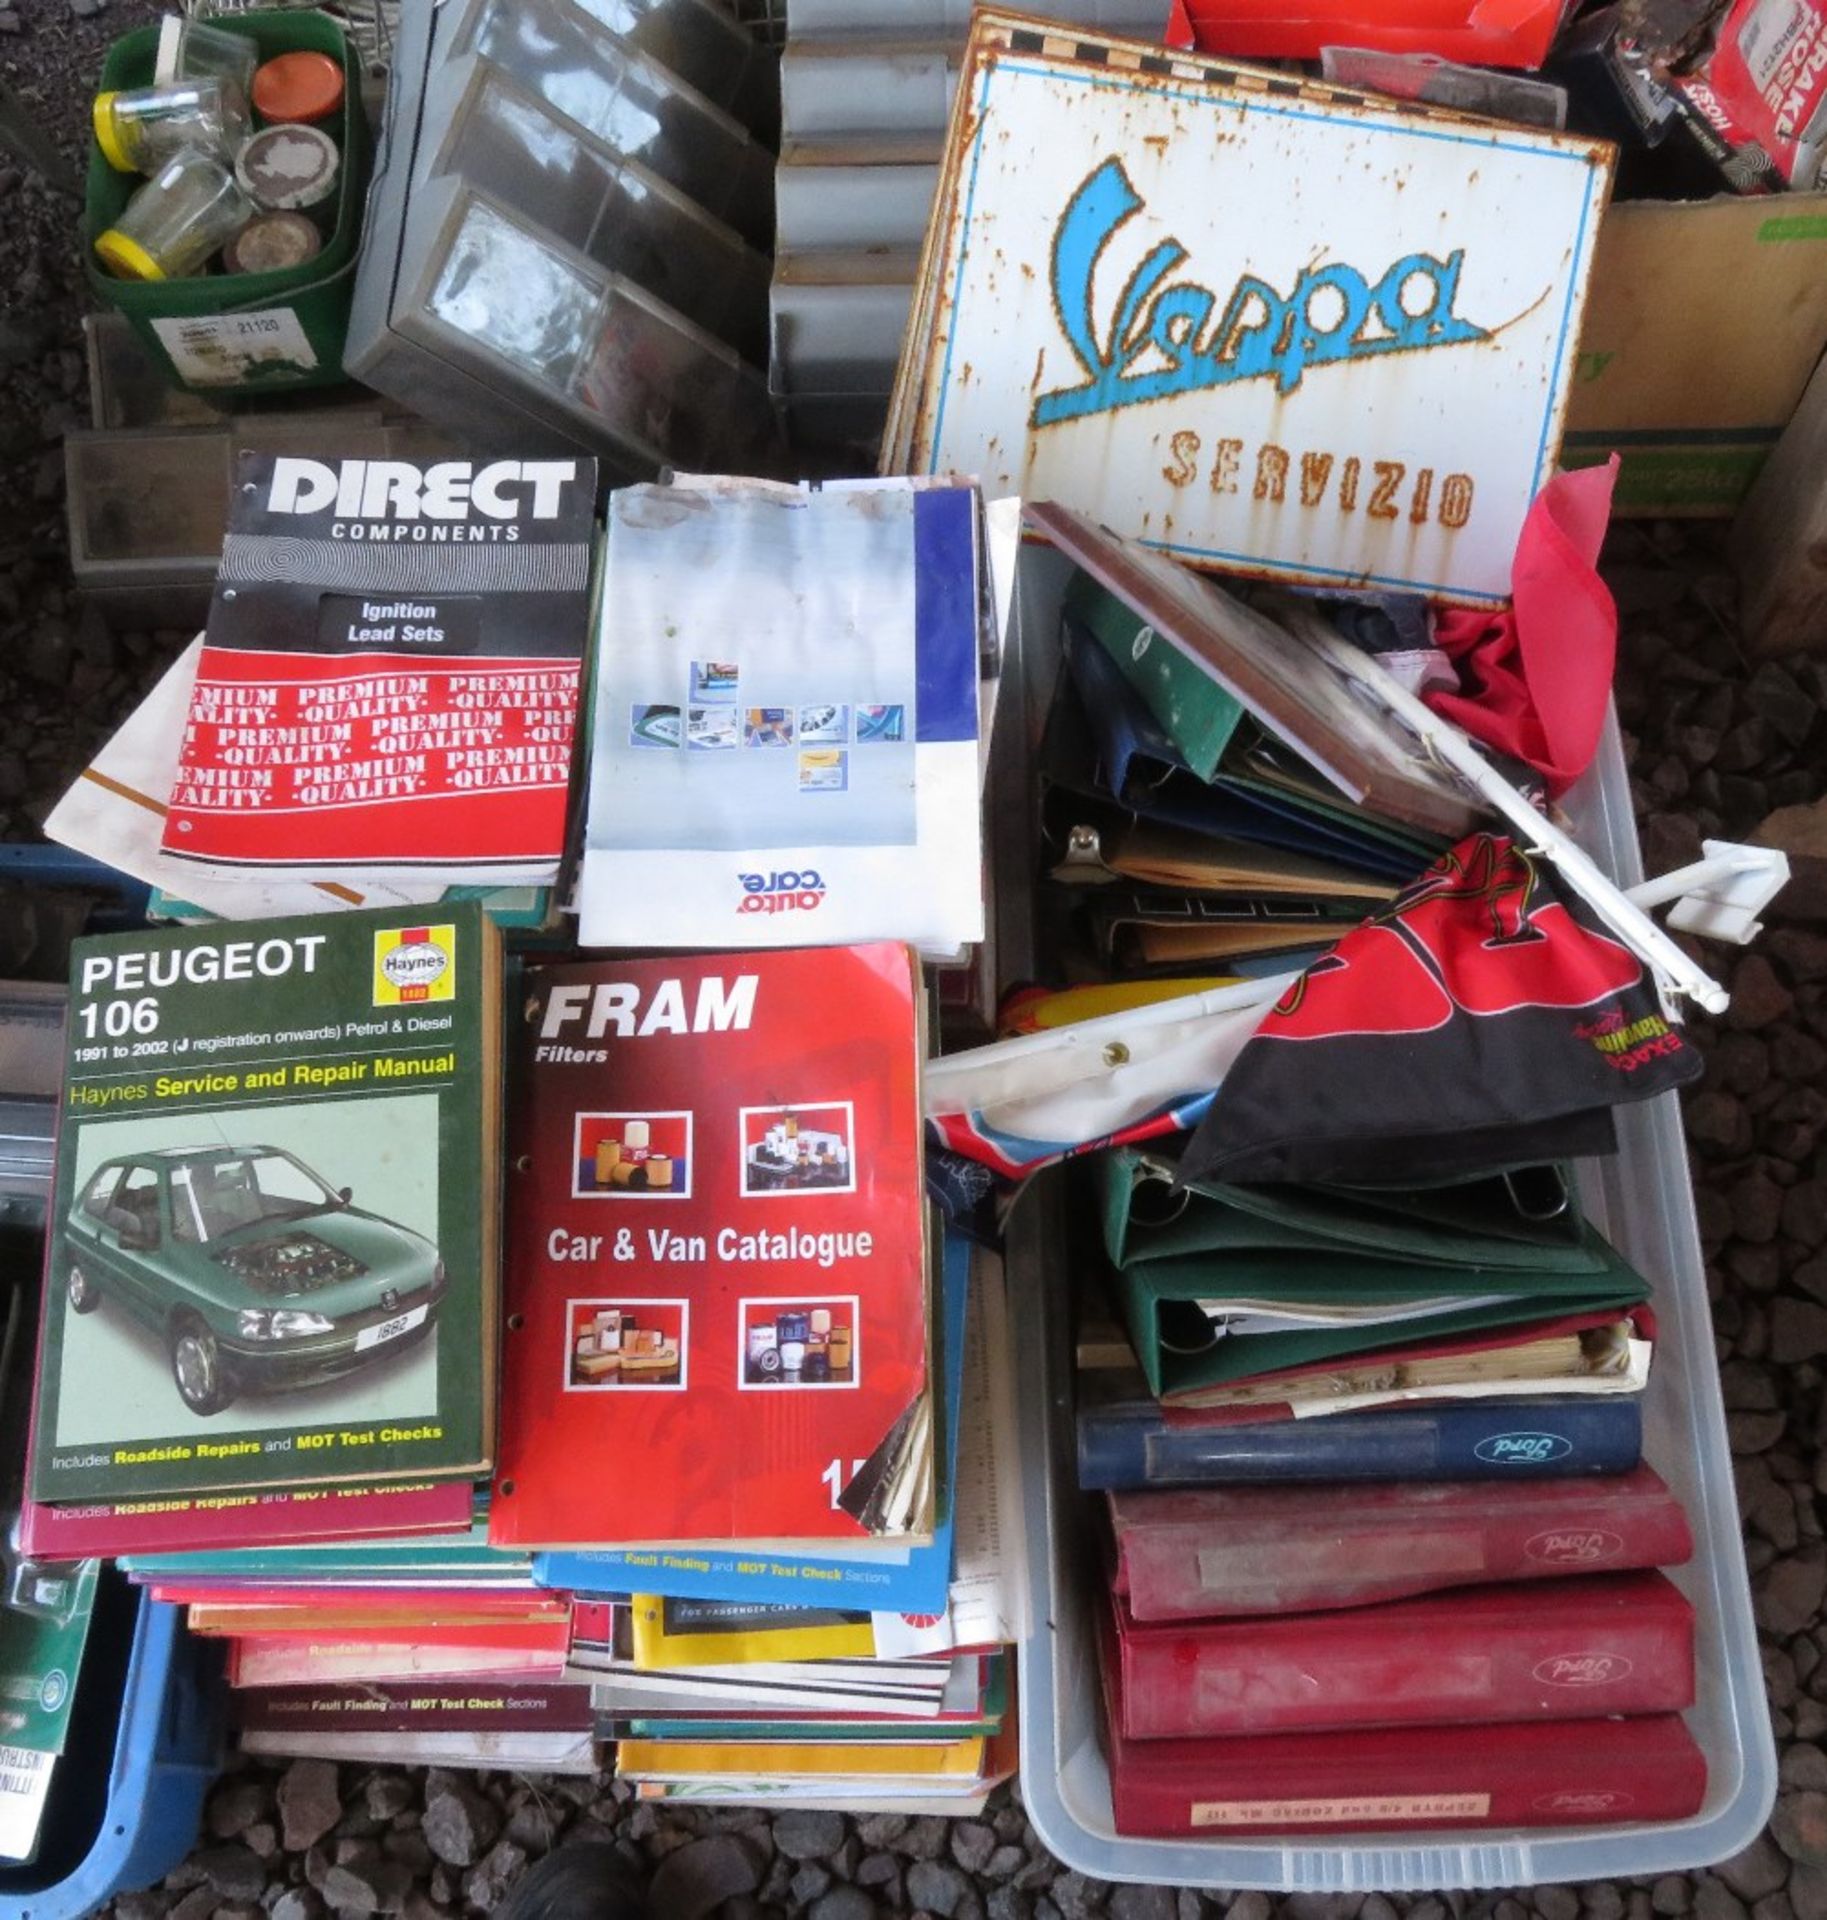 Large quantity of Haynes motoring manuals, various part catalogues and service booklets including